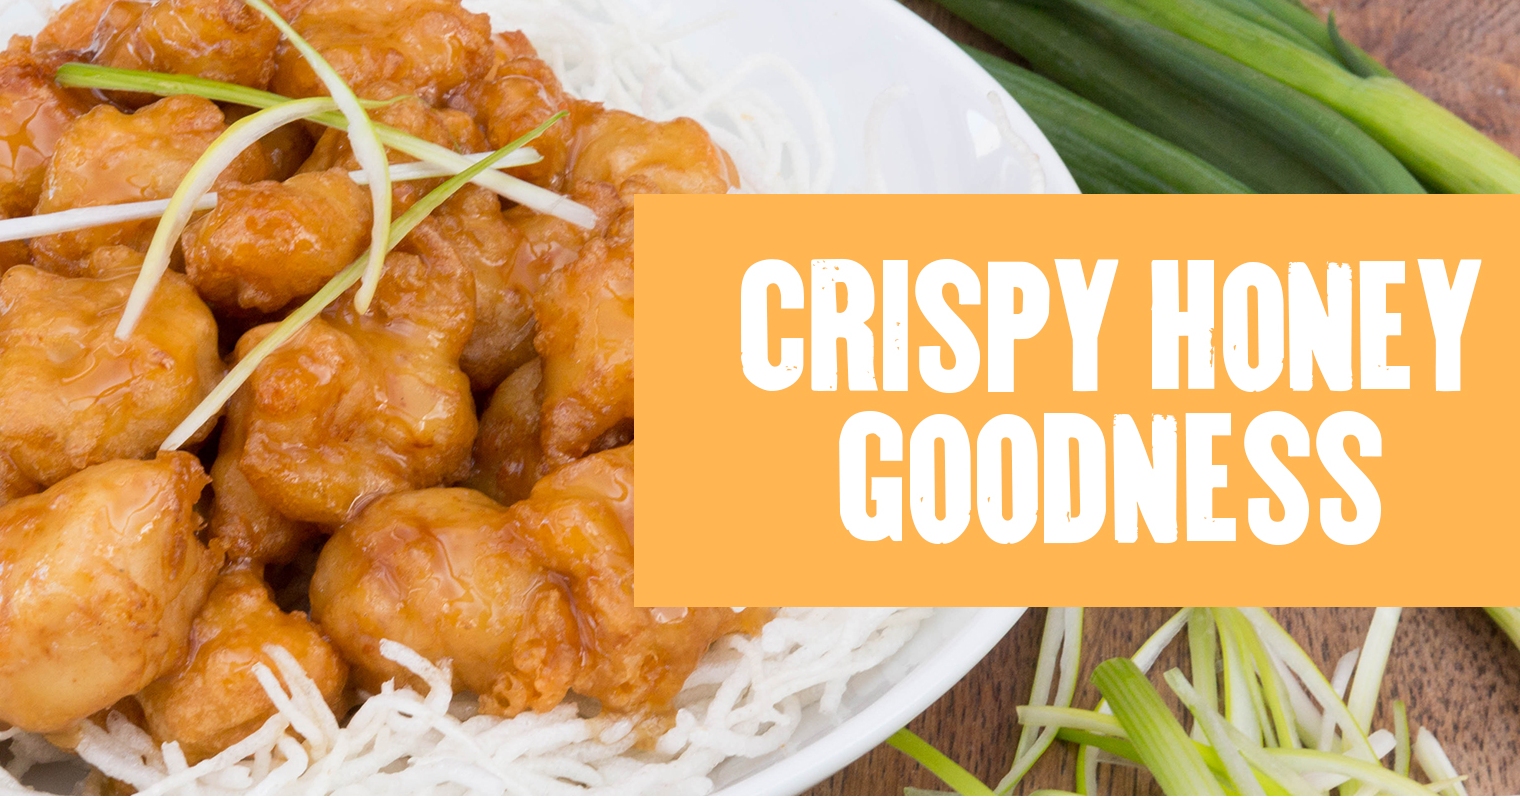 P.F. Chang’s: FREE Crispy Honey Chicken with Entree Purchase – TODAY ONLY!